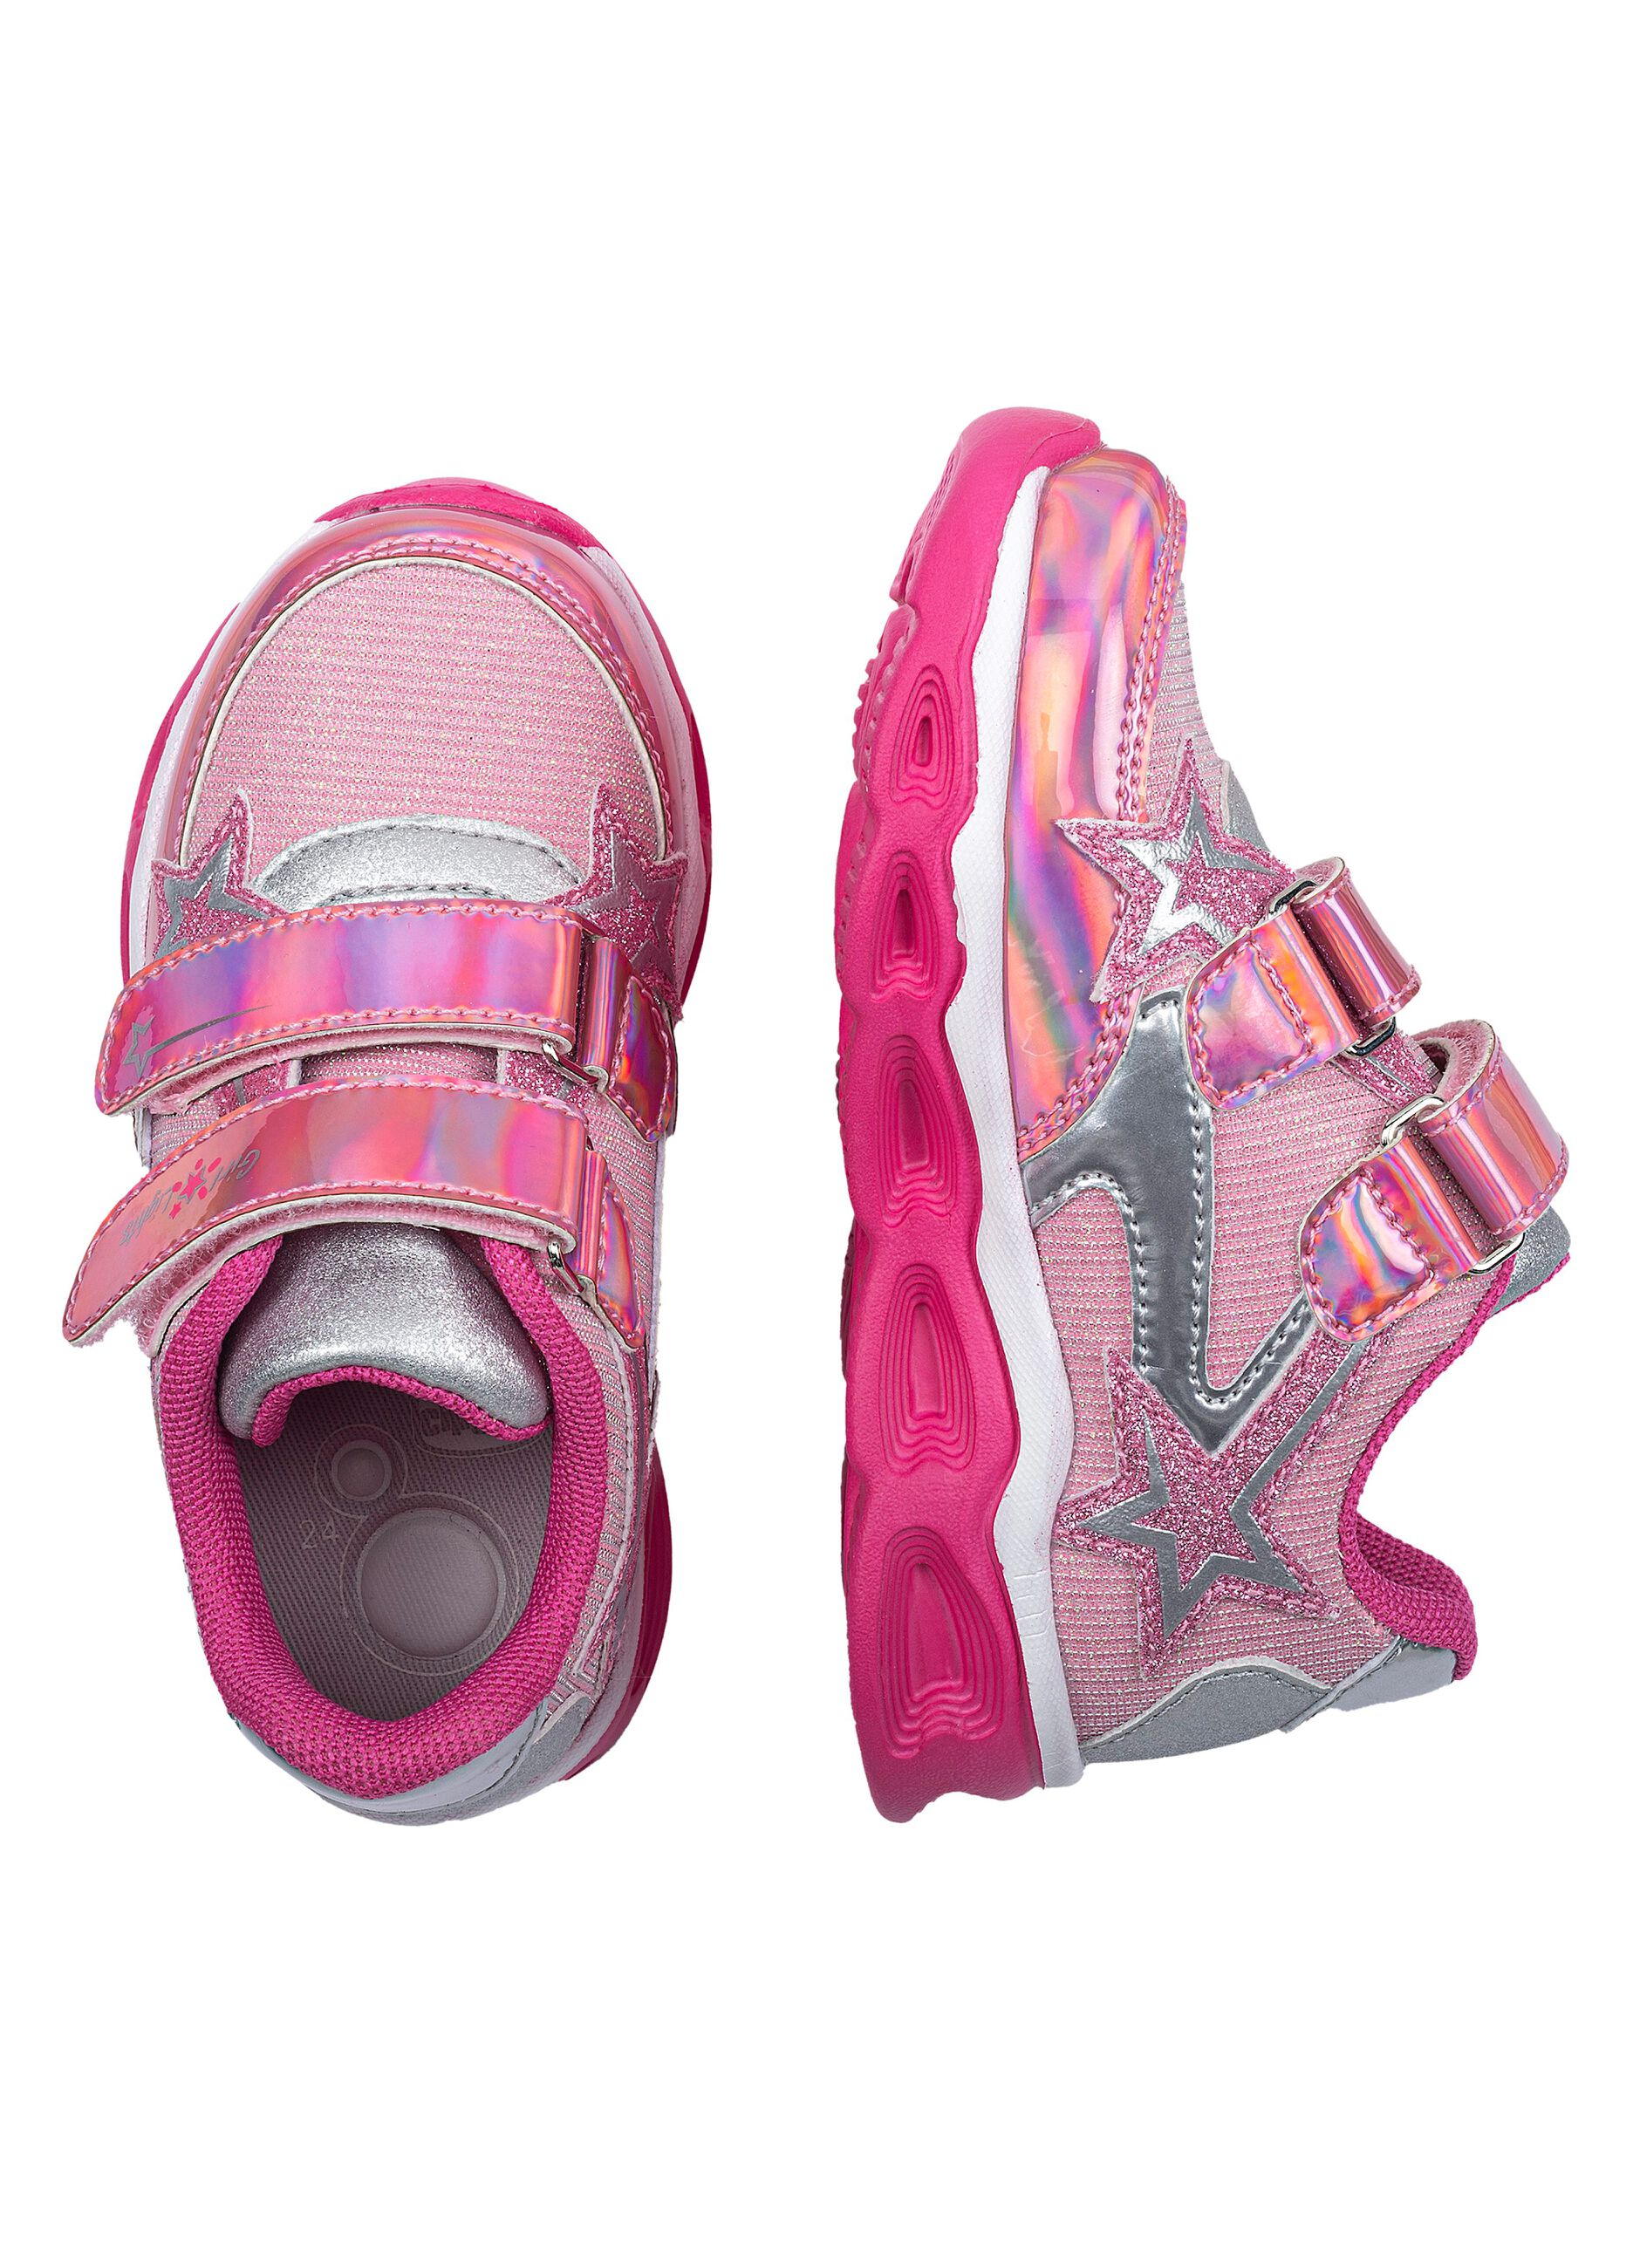 Chicco girls’ sneakers